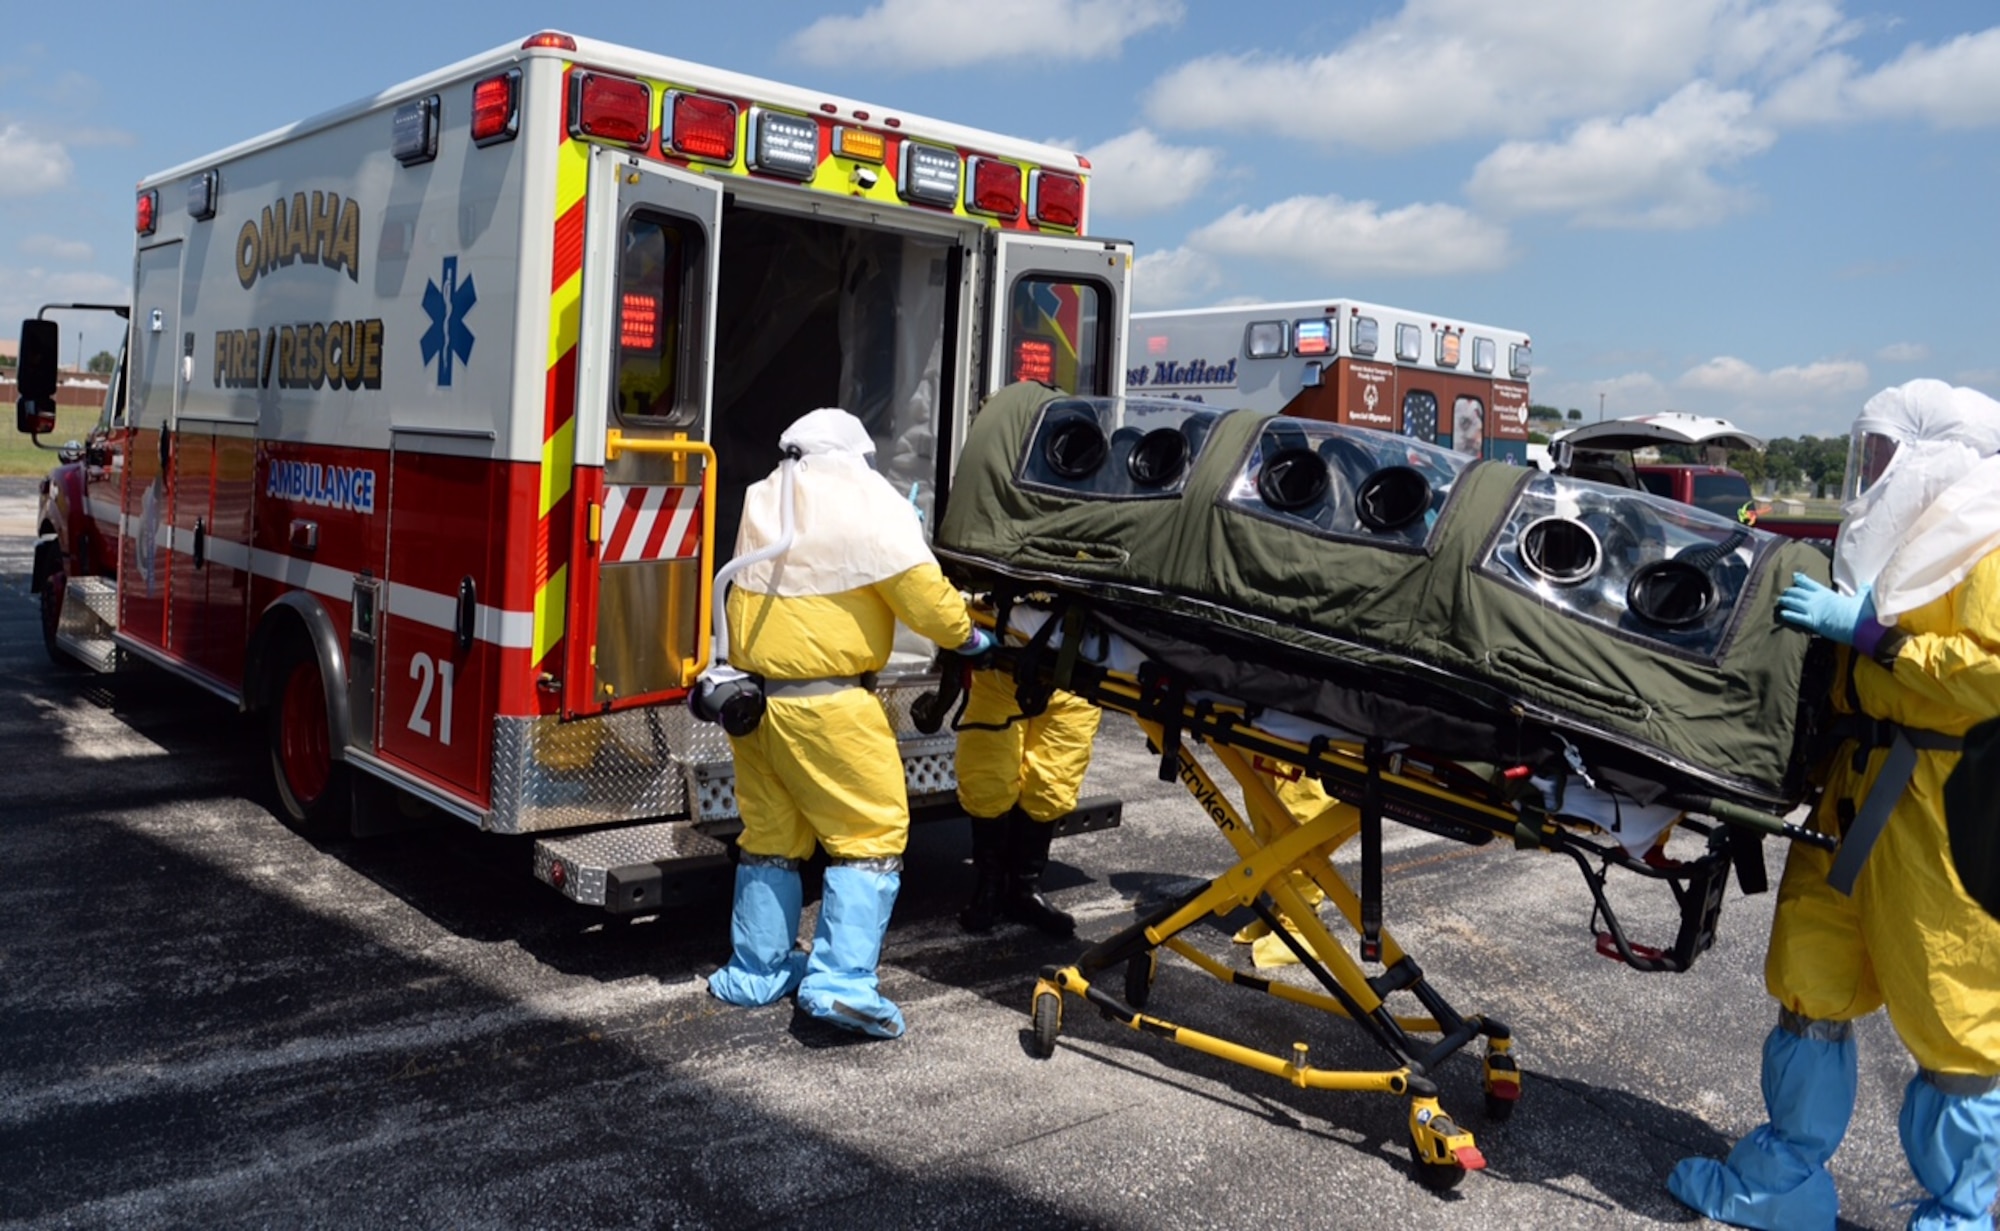 Members of the Omaha Fire and Rescue Department load a simulated patient into an ambulance during exercise Patriot 15, at Offutt Air Force Base, Neb., July 23, 2015. The exercise is a domestic operation disaster-response training exercise conducted by National Guard units working with federal, state and local emergency management agencies and first responders. (U.S. Air Force photo/Tech. Sgt. Nathan Lipscomb)